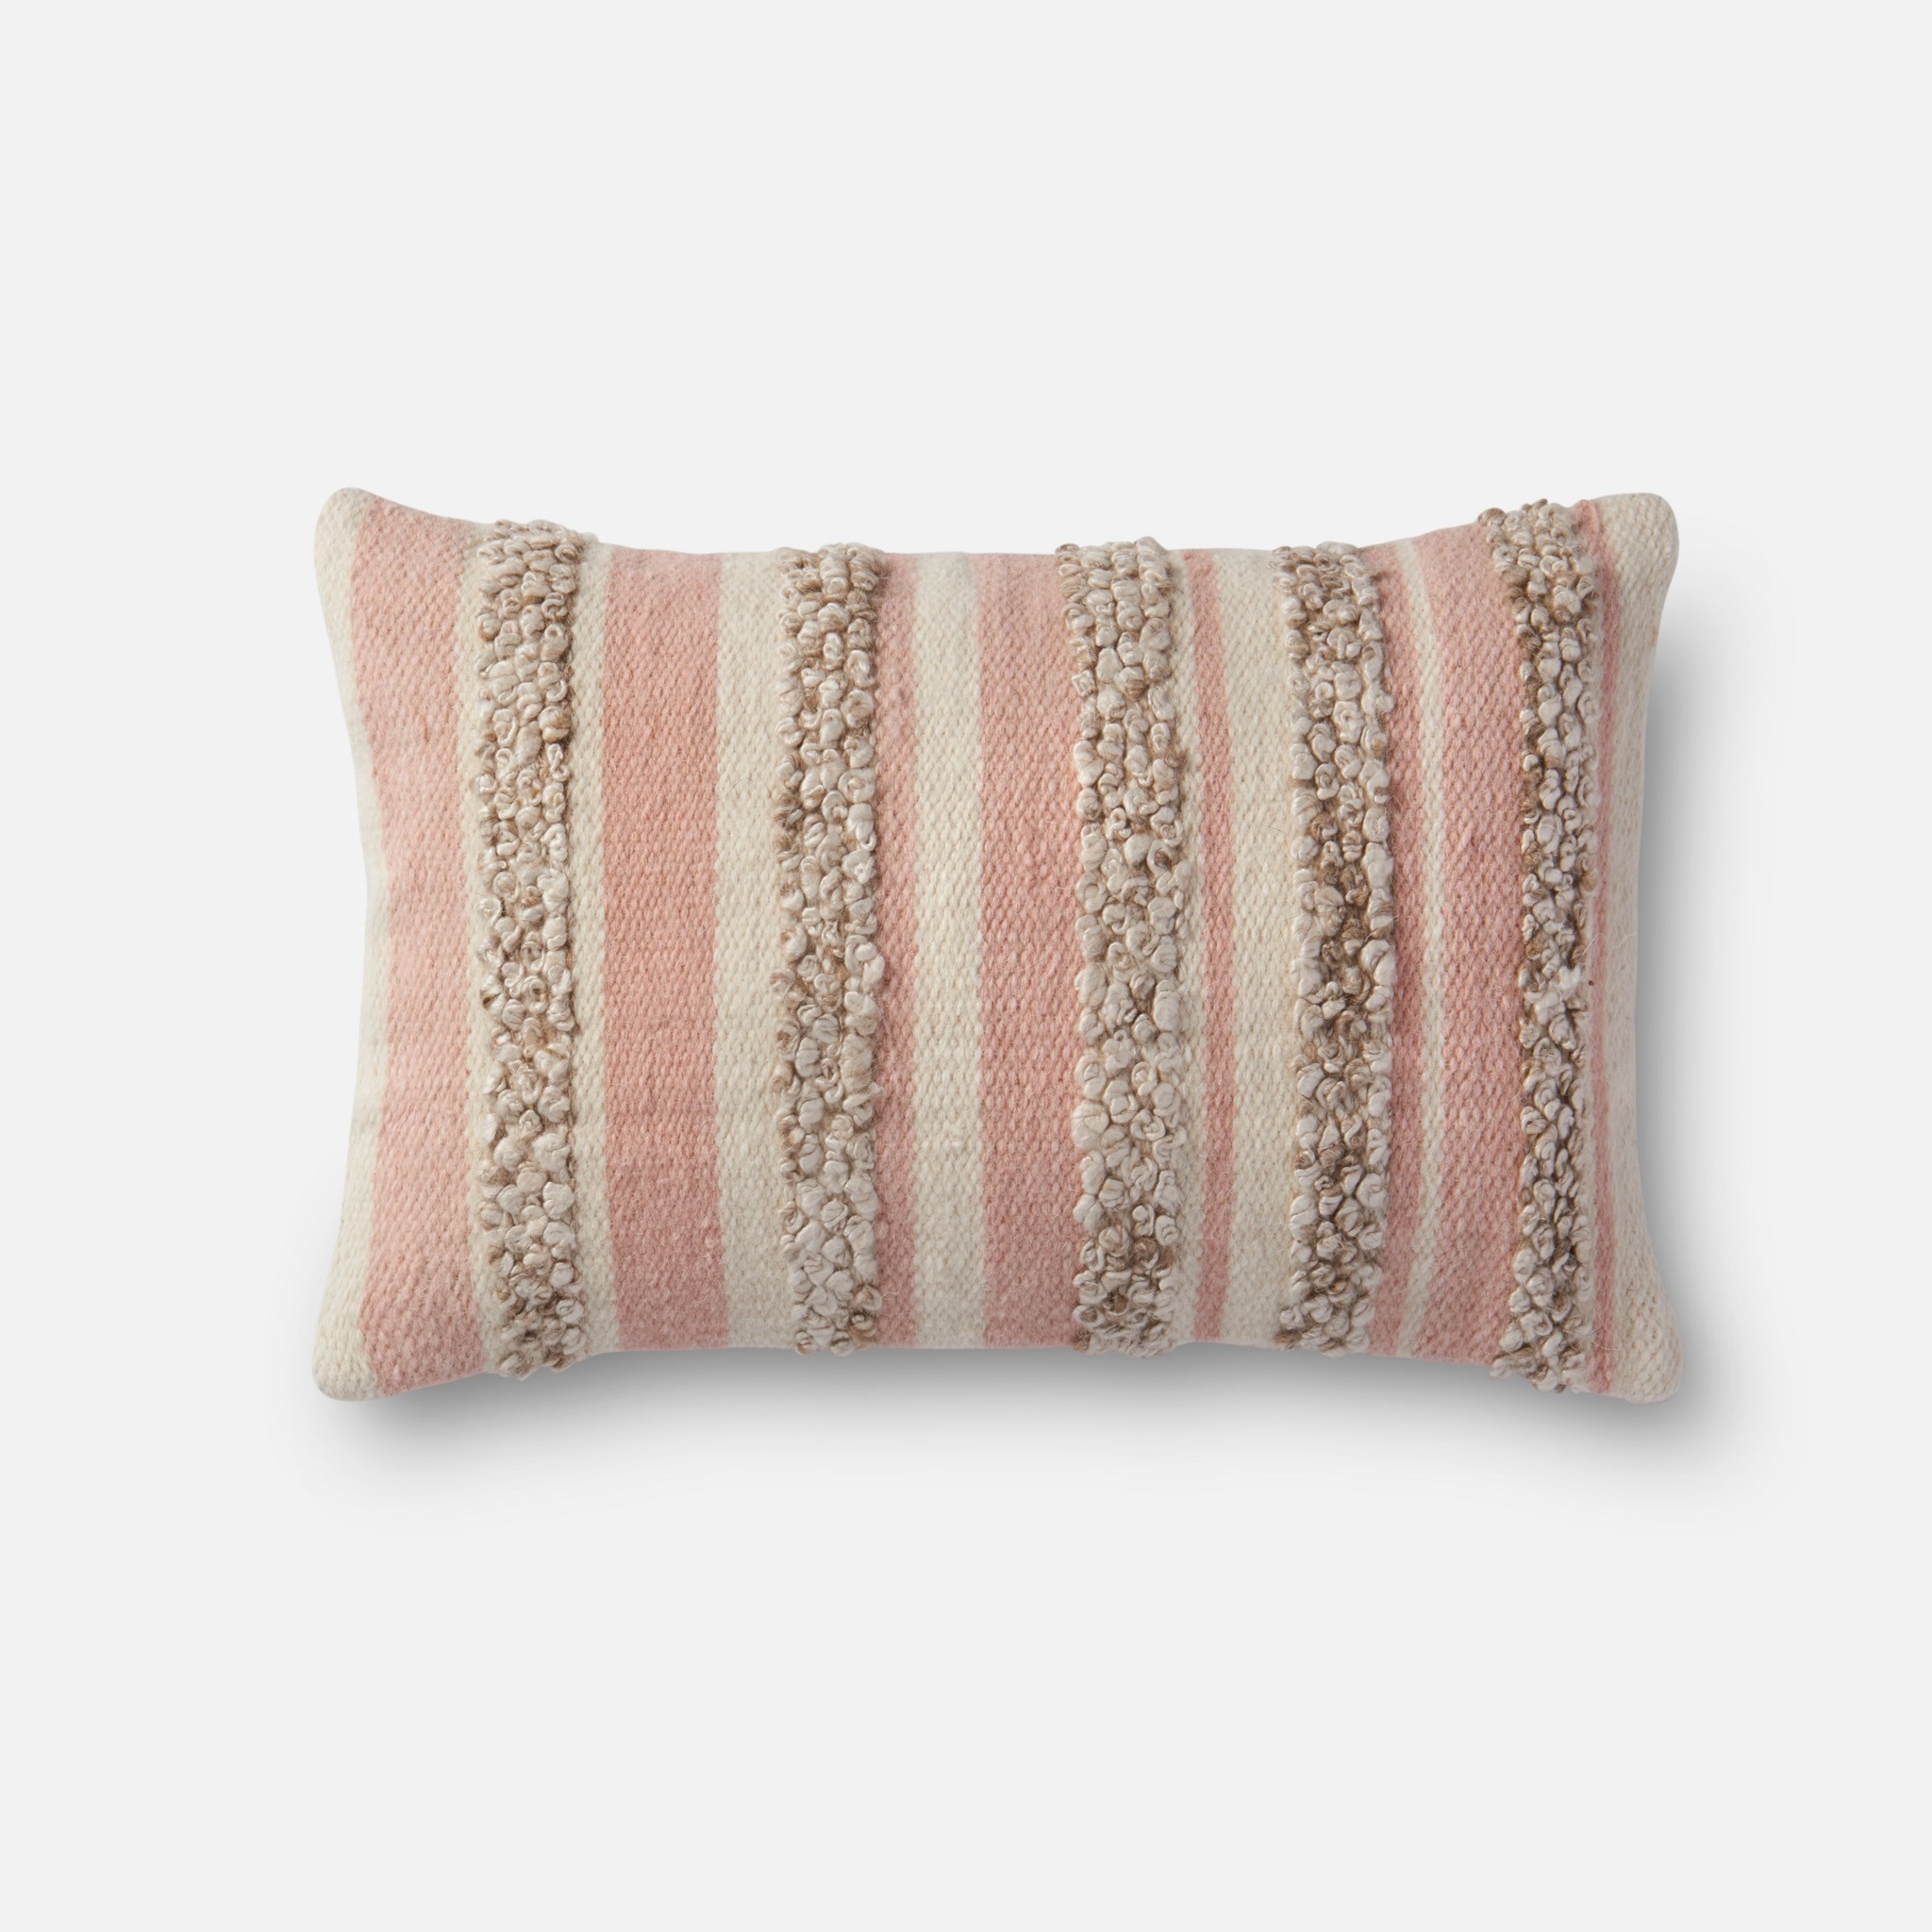 PILLOWS - PINK / IVORY - Image 0